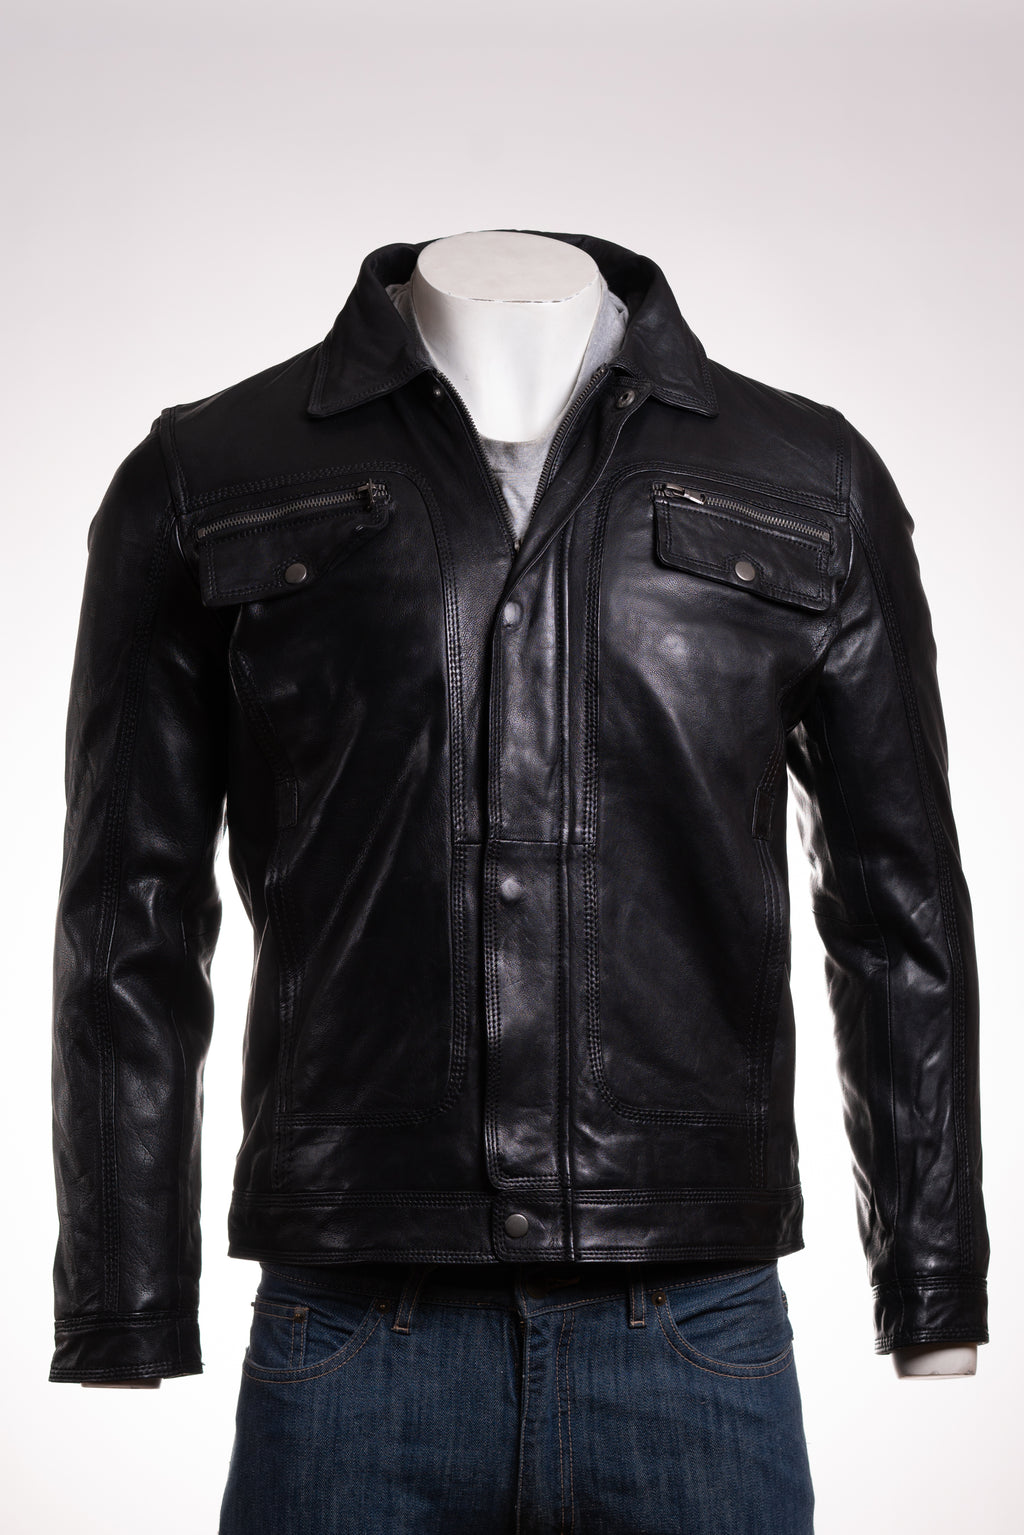 Men's Black Shirt Style Leather Jacket With Removable Sheepskin Collar: Gabriele